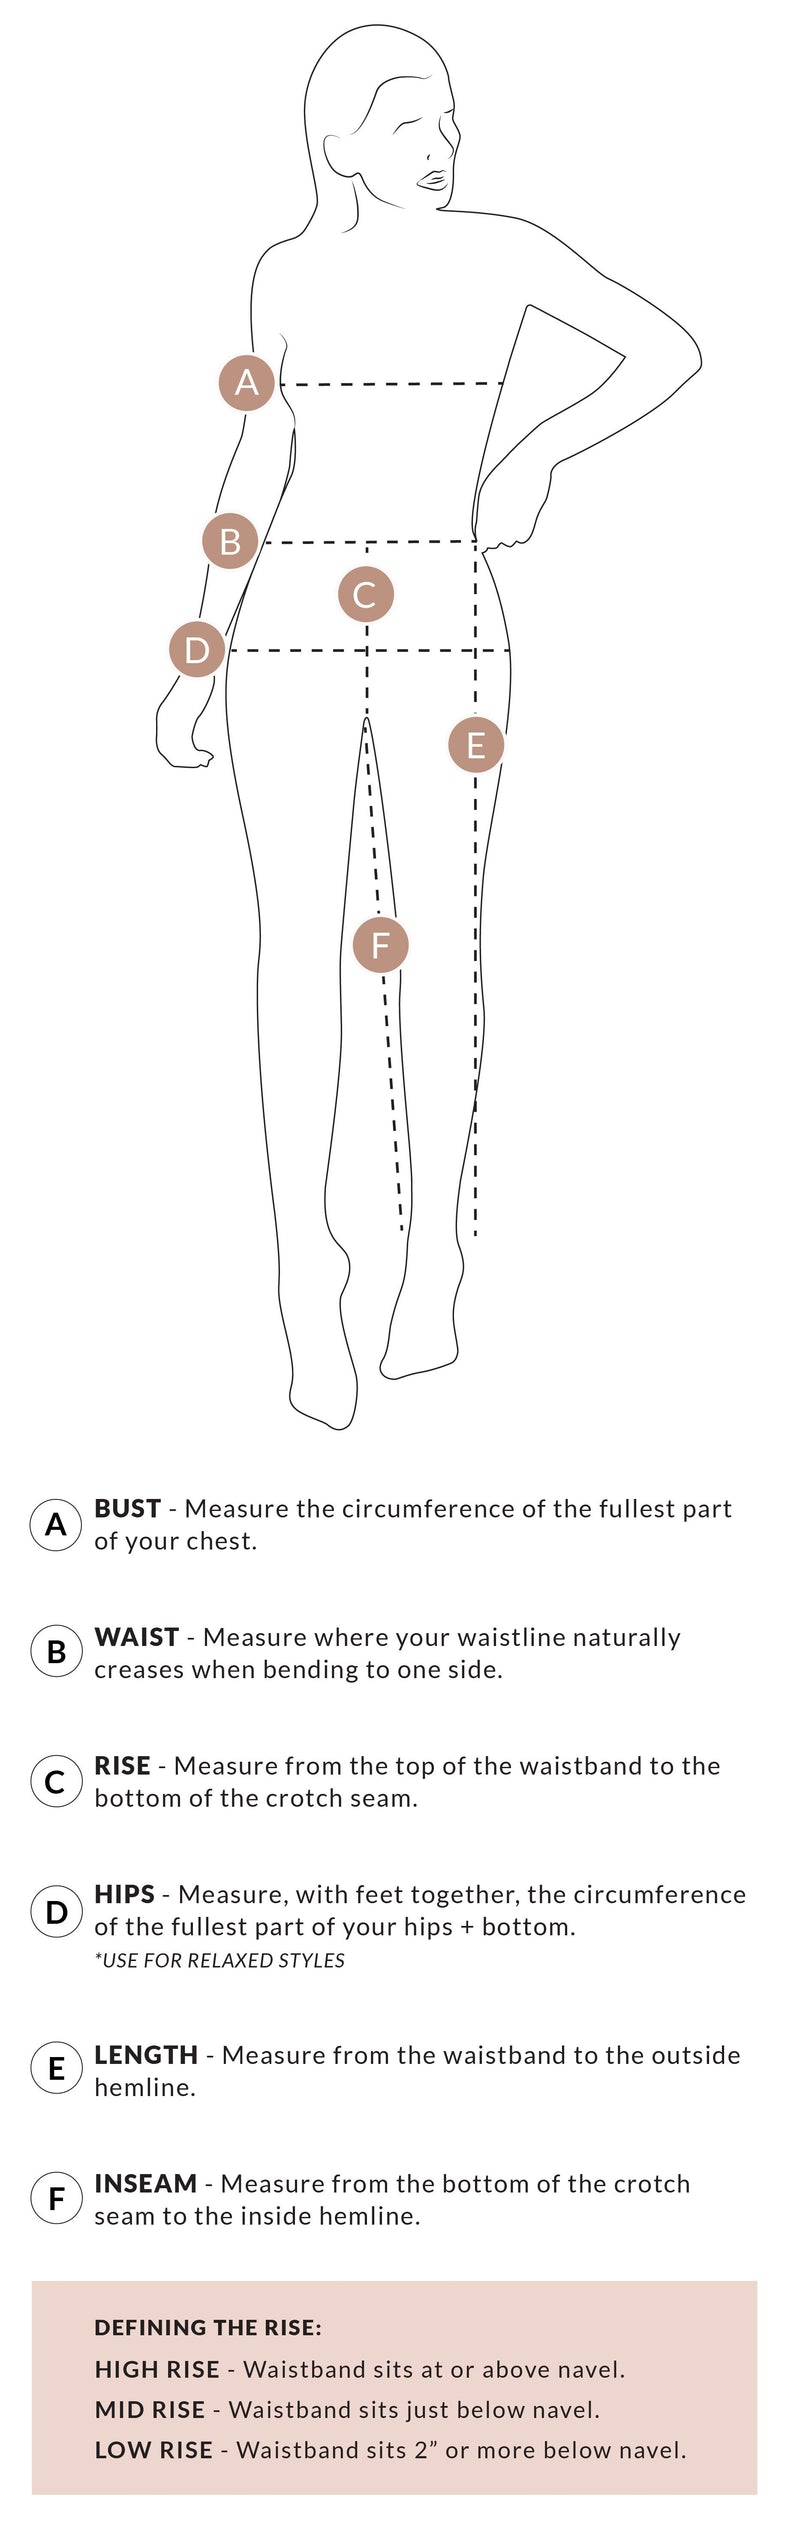 Measuring Diagram. For BUST, measure the circumference of the fullest part of your chest. For WAIST, measure where your waistline naturally creases when bending to one side. For RISE, measure from the top of the waistband to the bottom of the crotch seam.  For HIPS, measure, with feet together, the circumference of the fullest part of your hips + bottom. For leg LENGTH, measure from the waistband to the outside hemline. For INSEAM, measure from the bottom of the crotch seam to the inside hemline.  Defining the rise of pants. For HIGH RISE, the waistband sits at or above navel. For MID RISE, the waistband sits just below navel. For LOW RISE, the waistband sits 2” or more below navel.